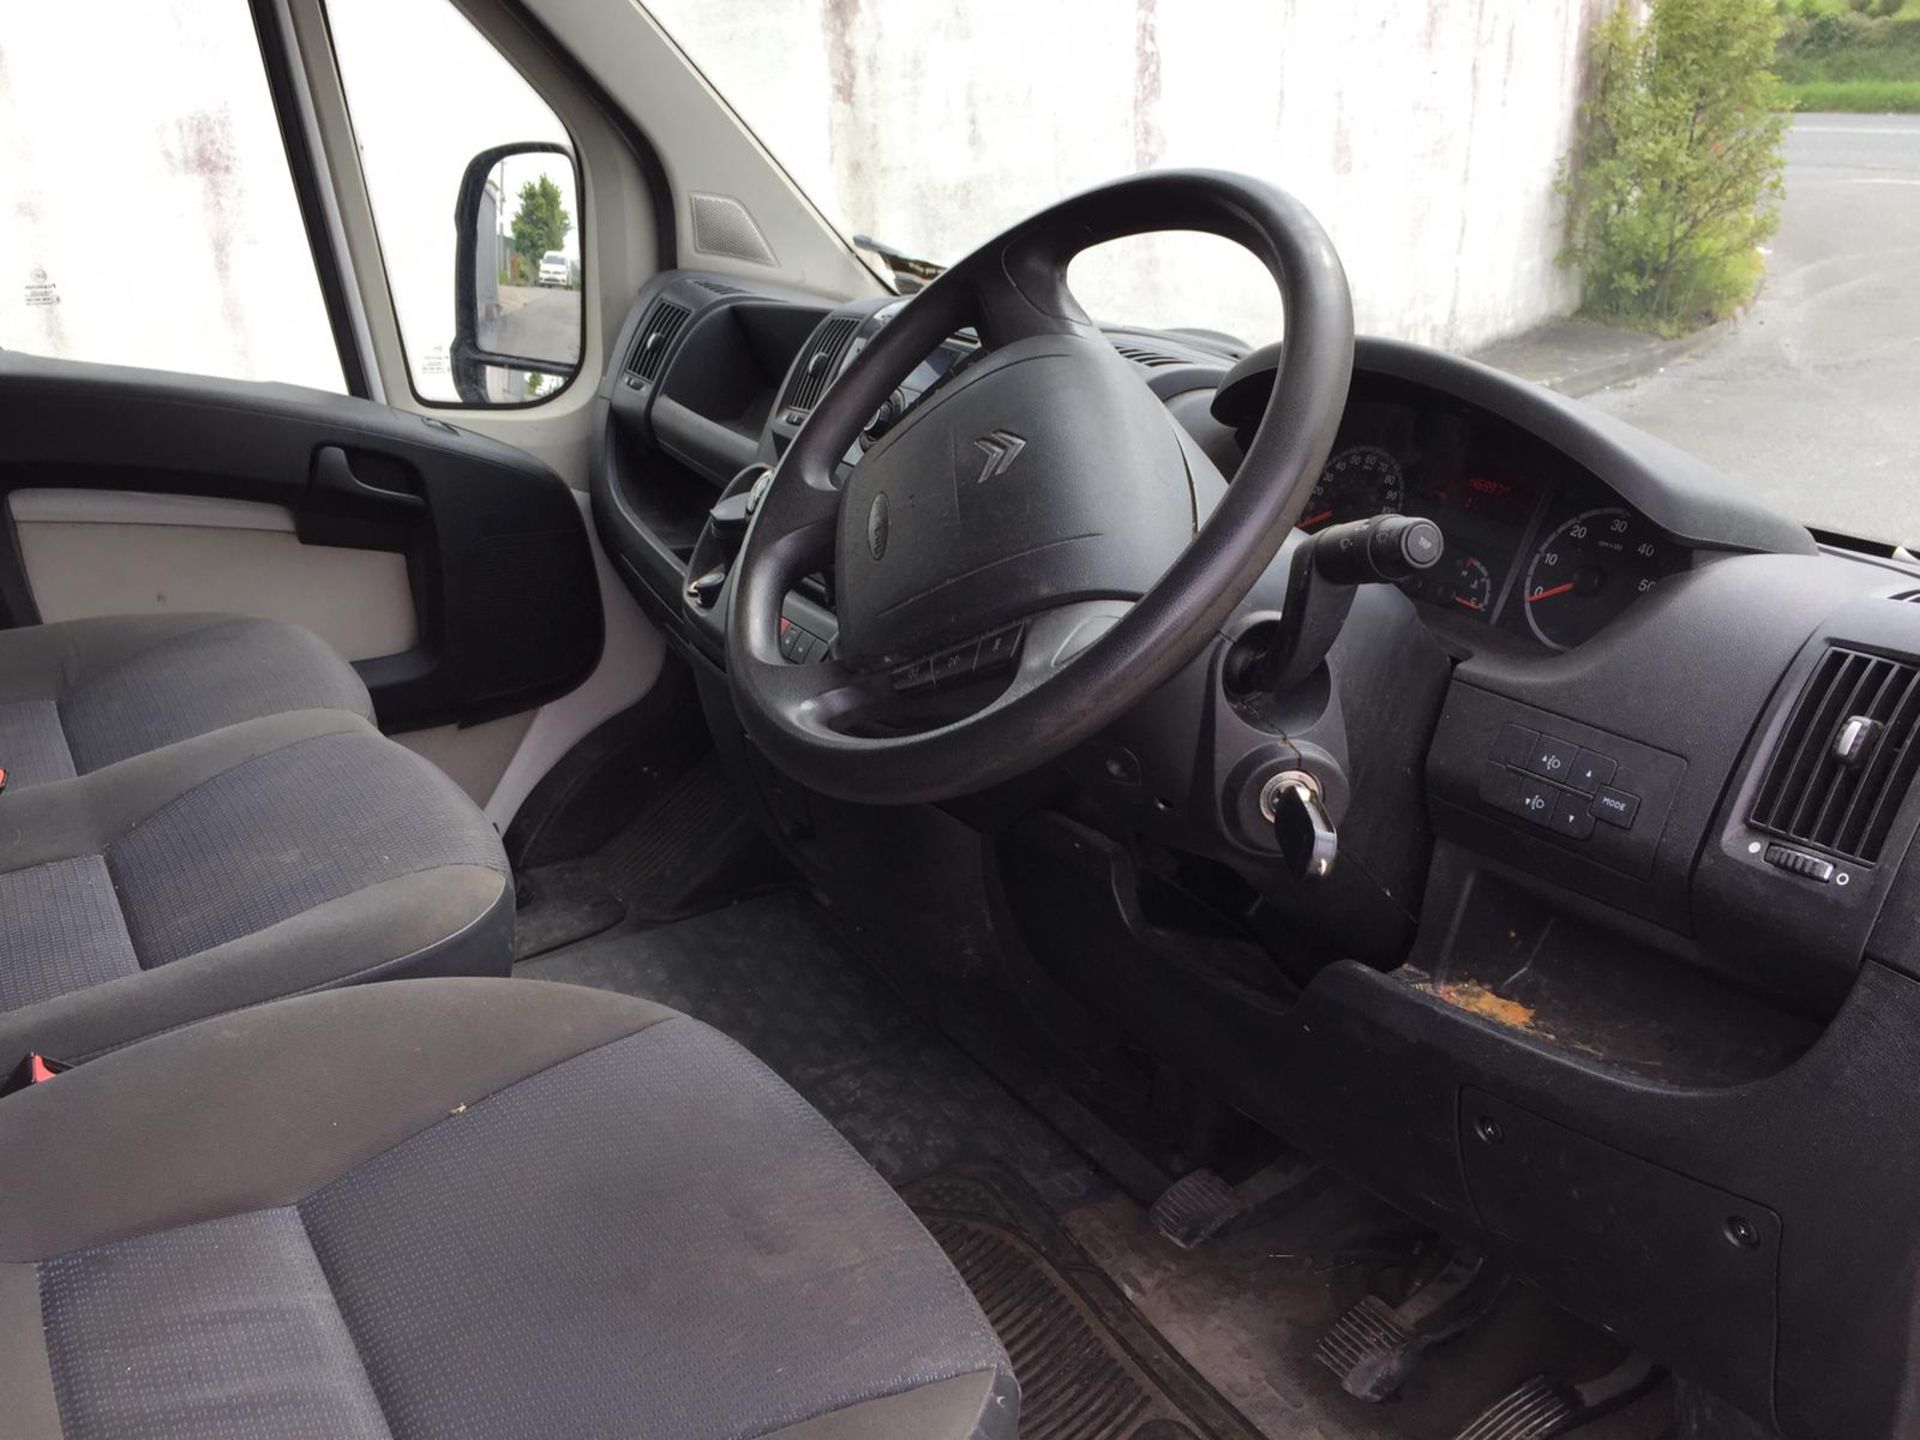 12C10914 UNRESERVED 2012 Citroen Relay 2 30 L1 H1 HDI - Image 8 of 8